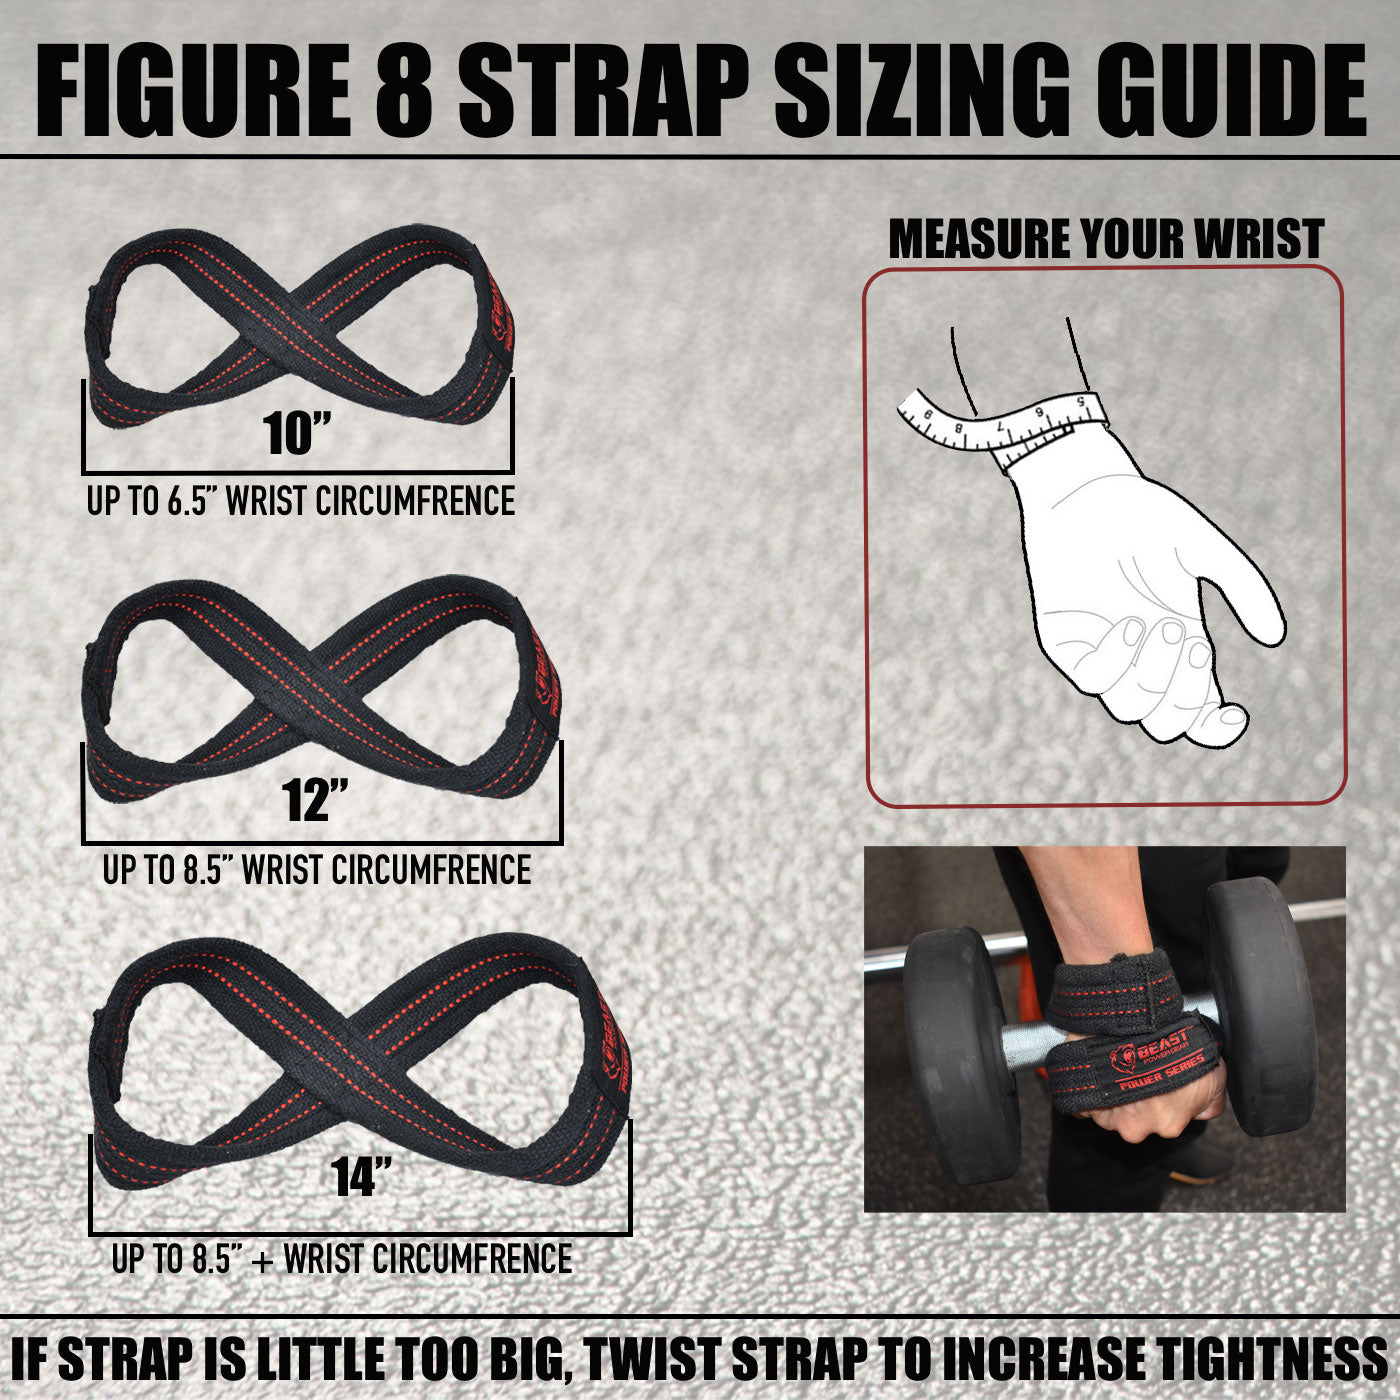  Figure 8 Lifting Straps For Deadlift, Powerlifting, Strongman,  & Cross Training Strong Weightlifting Wrist Straps For Men, Women(Black,  Small) : Sports & Outdoors